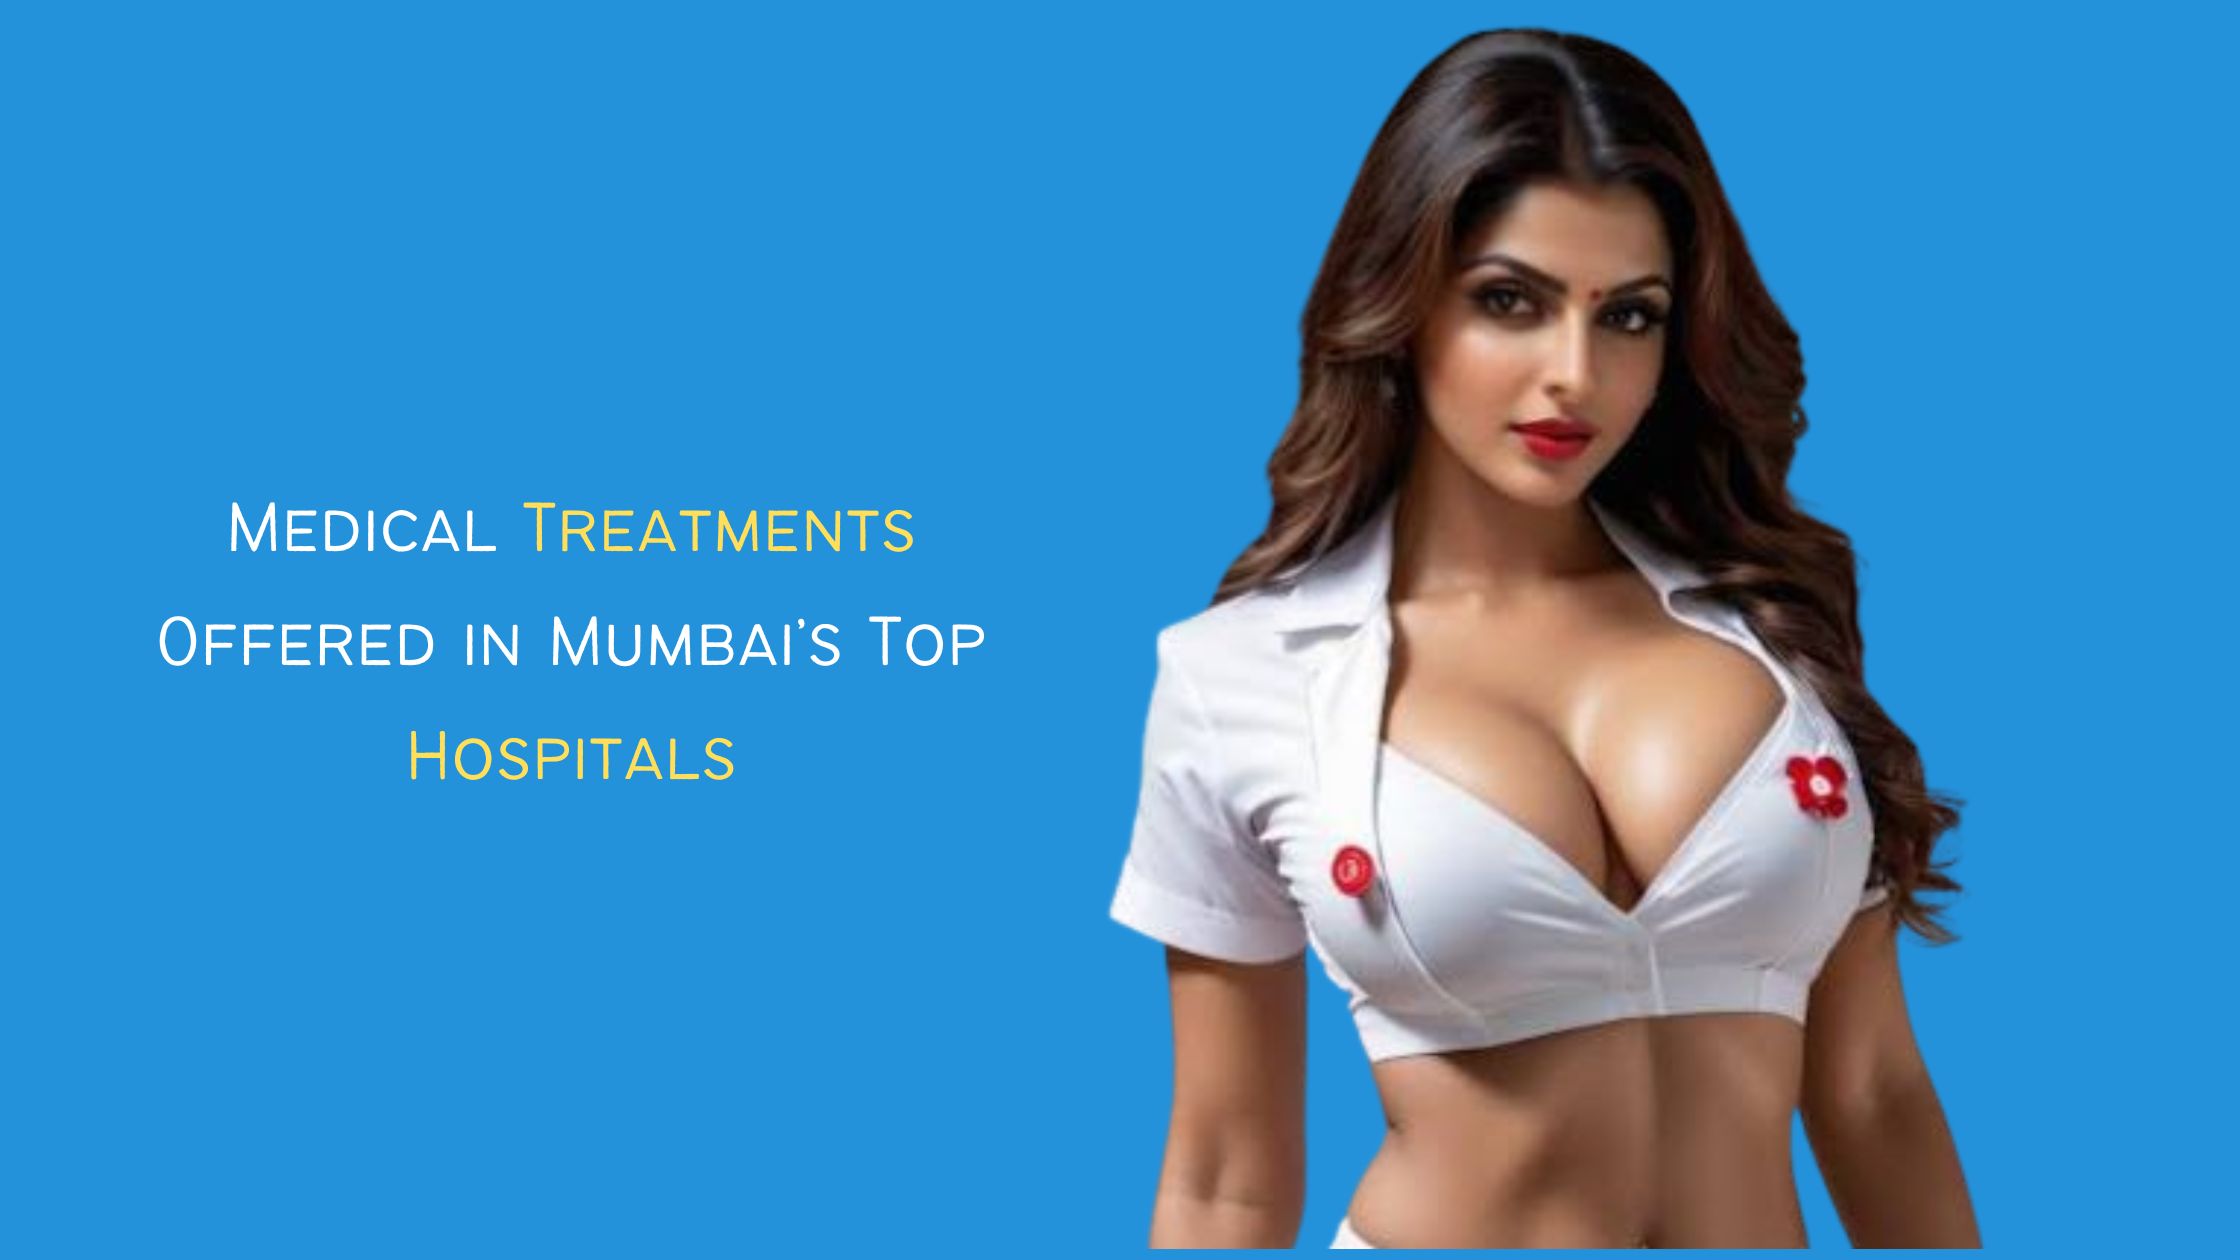 Medical Treatments Offered in Mumbai’s Top Hospitals